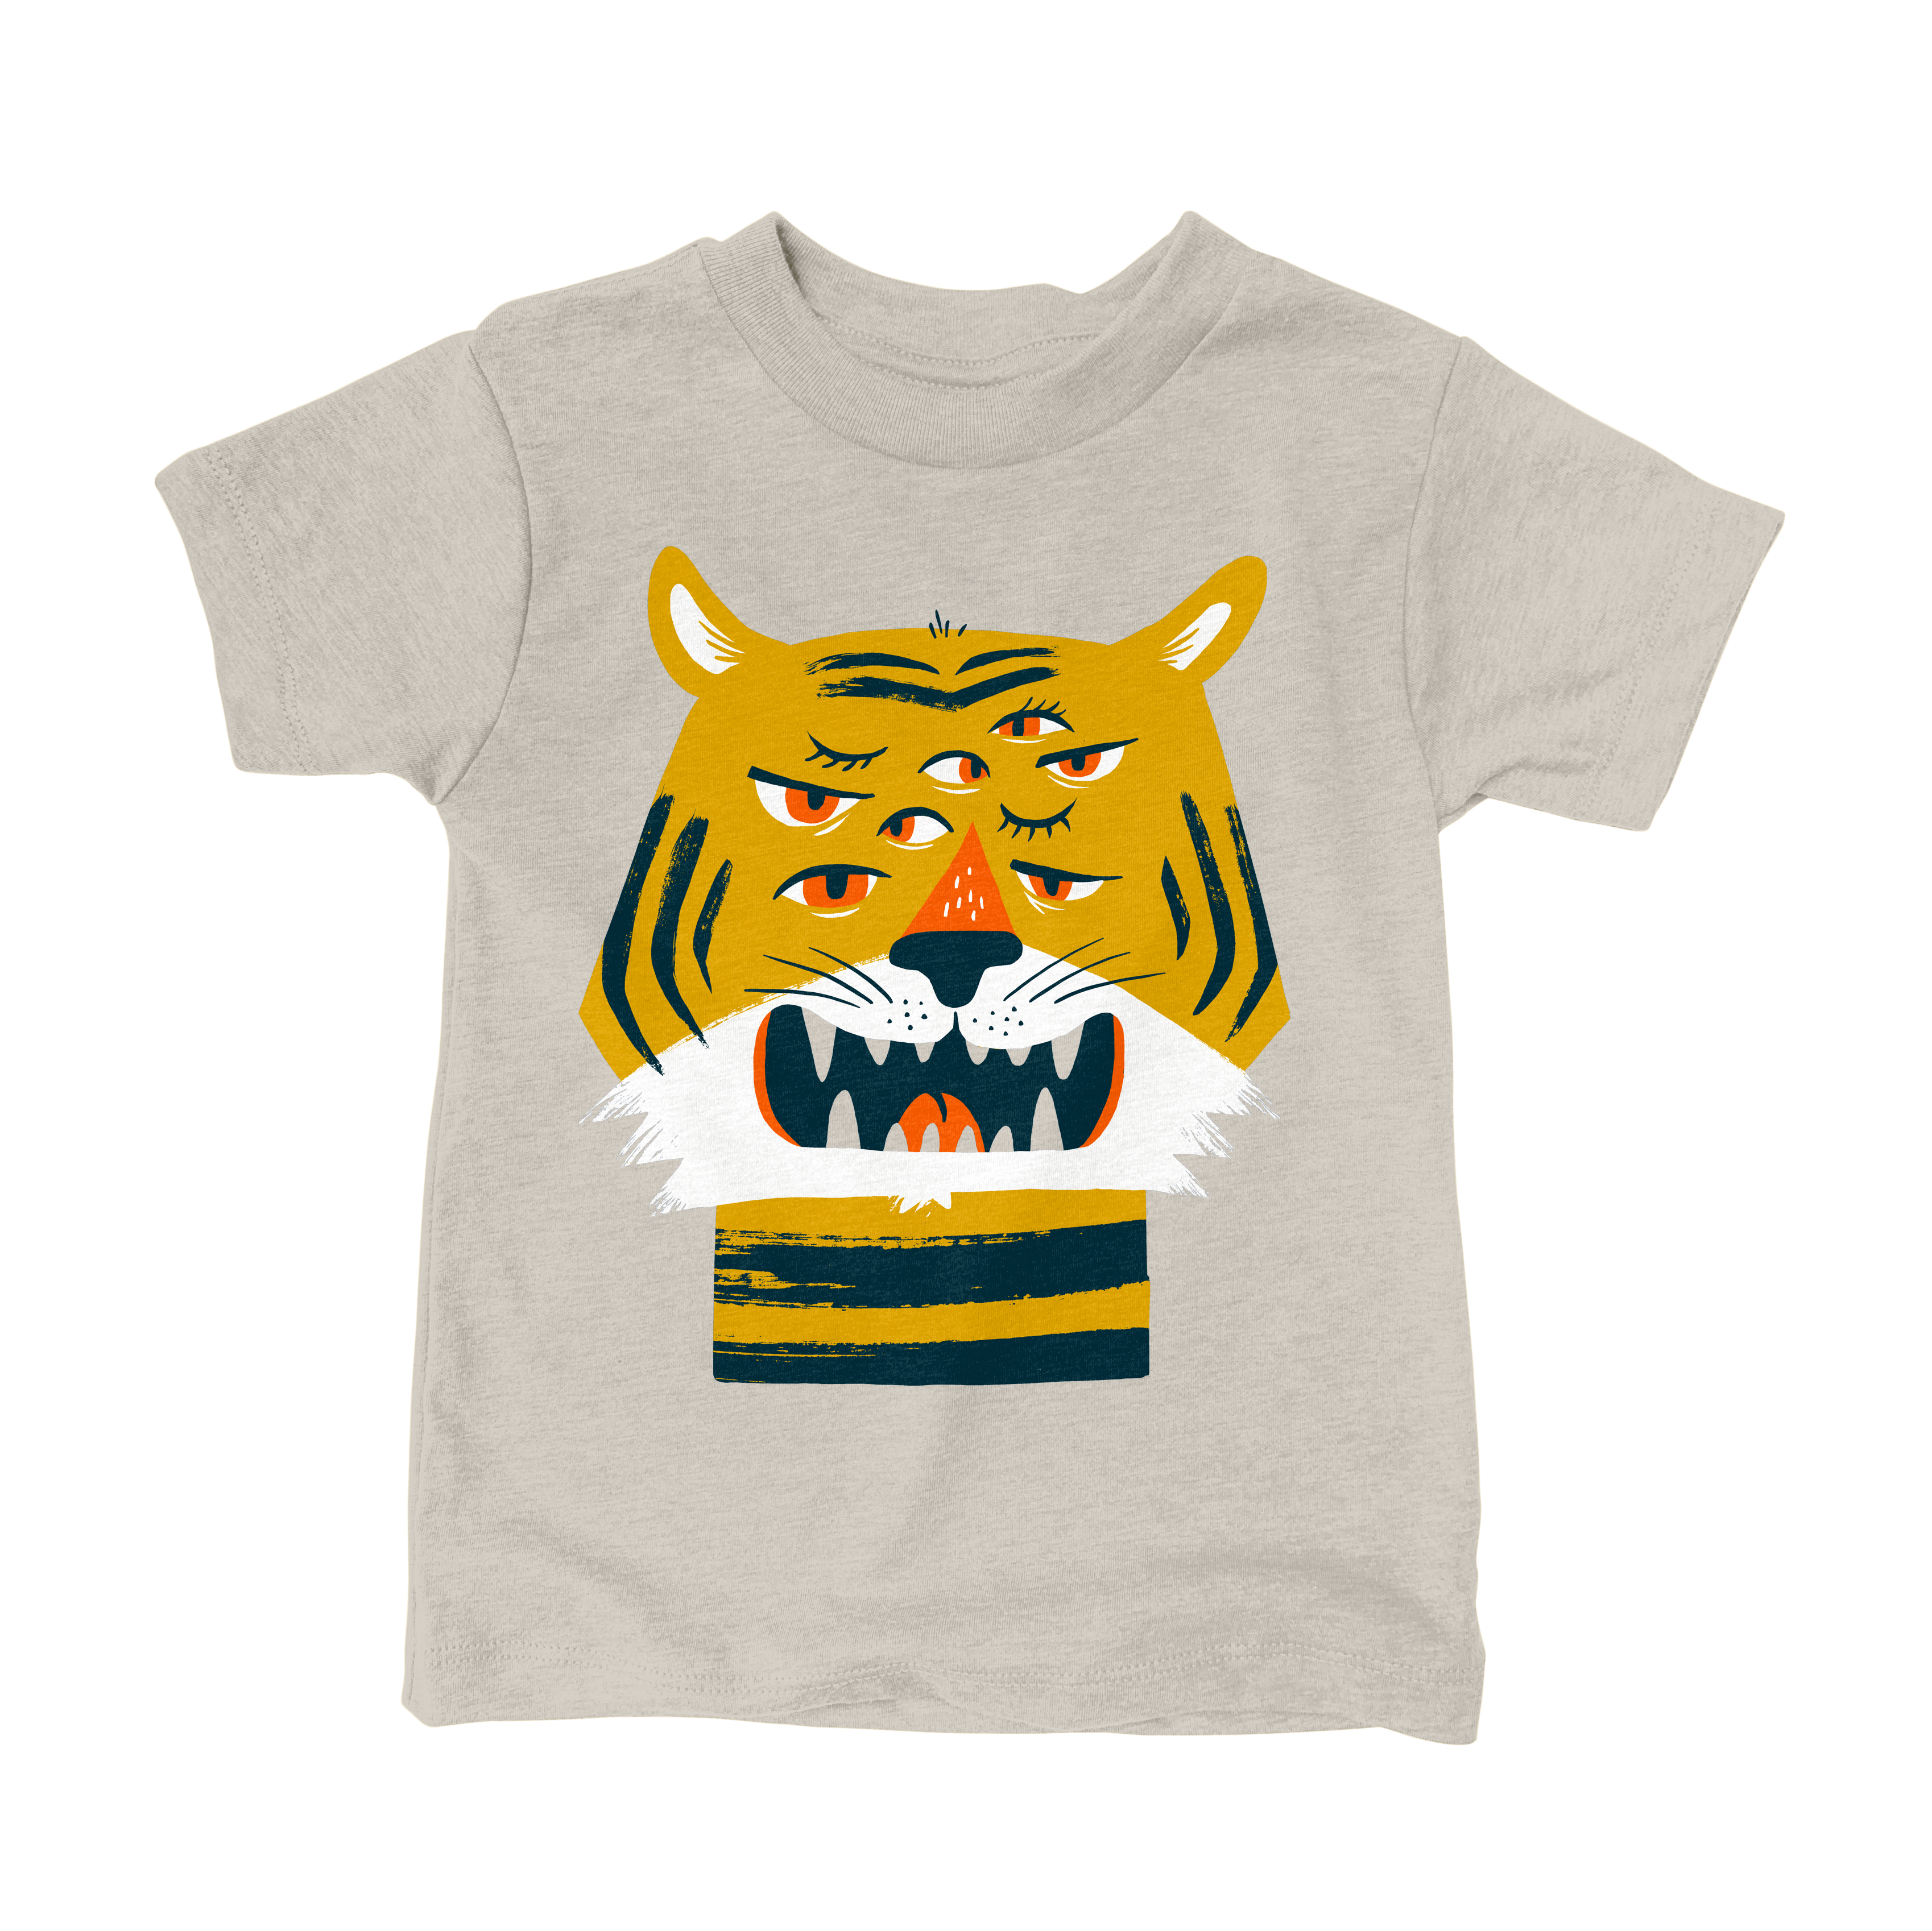 Factory 43 - Eyes of the tiger (Kids Tee): Youth / Small (6-8) / Dust